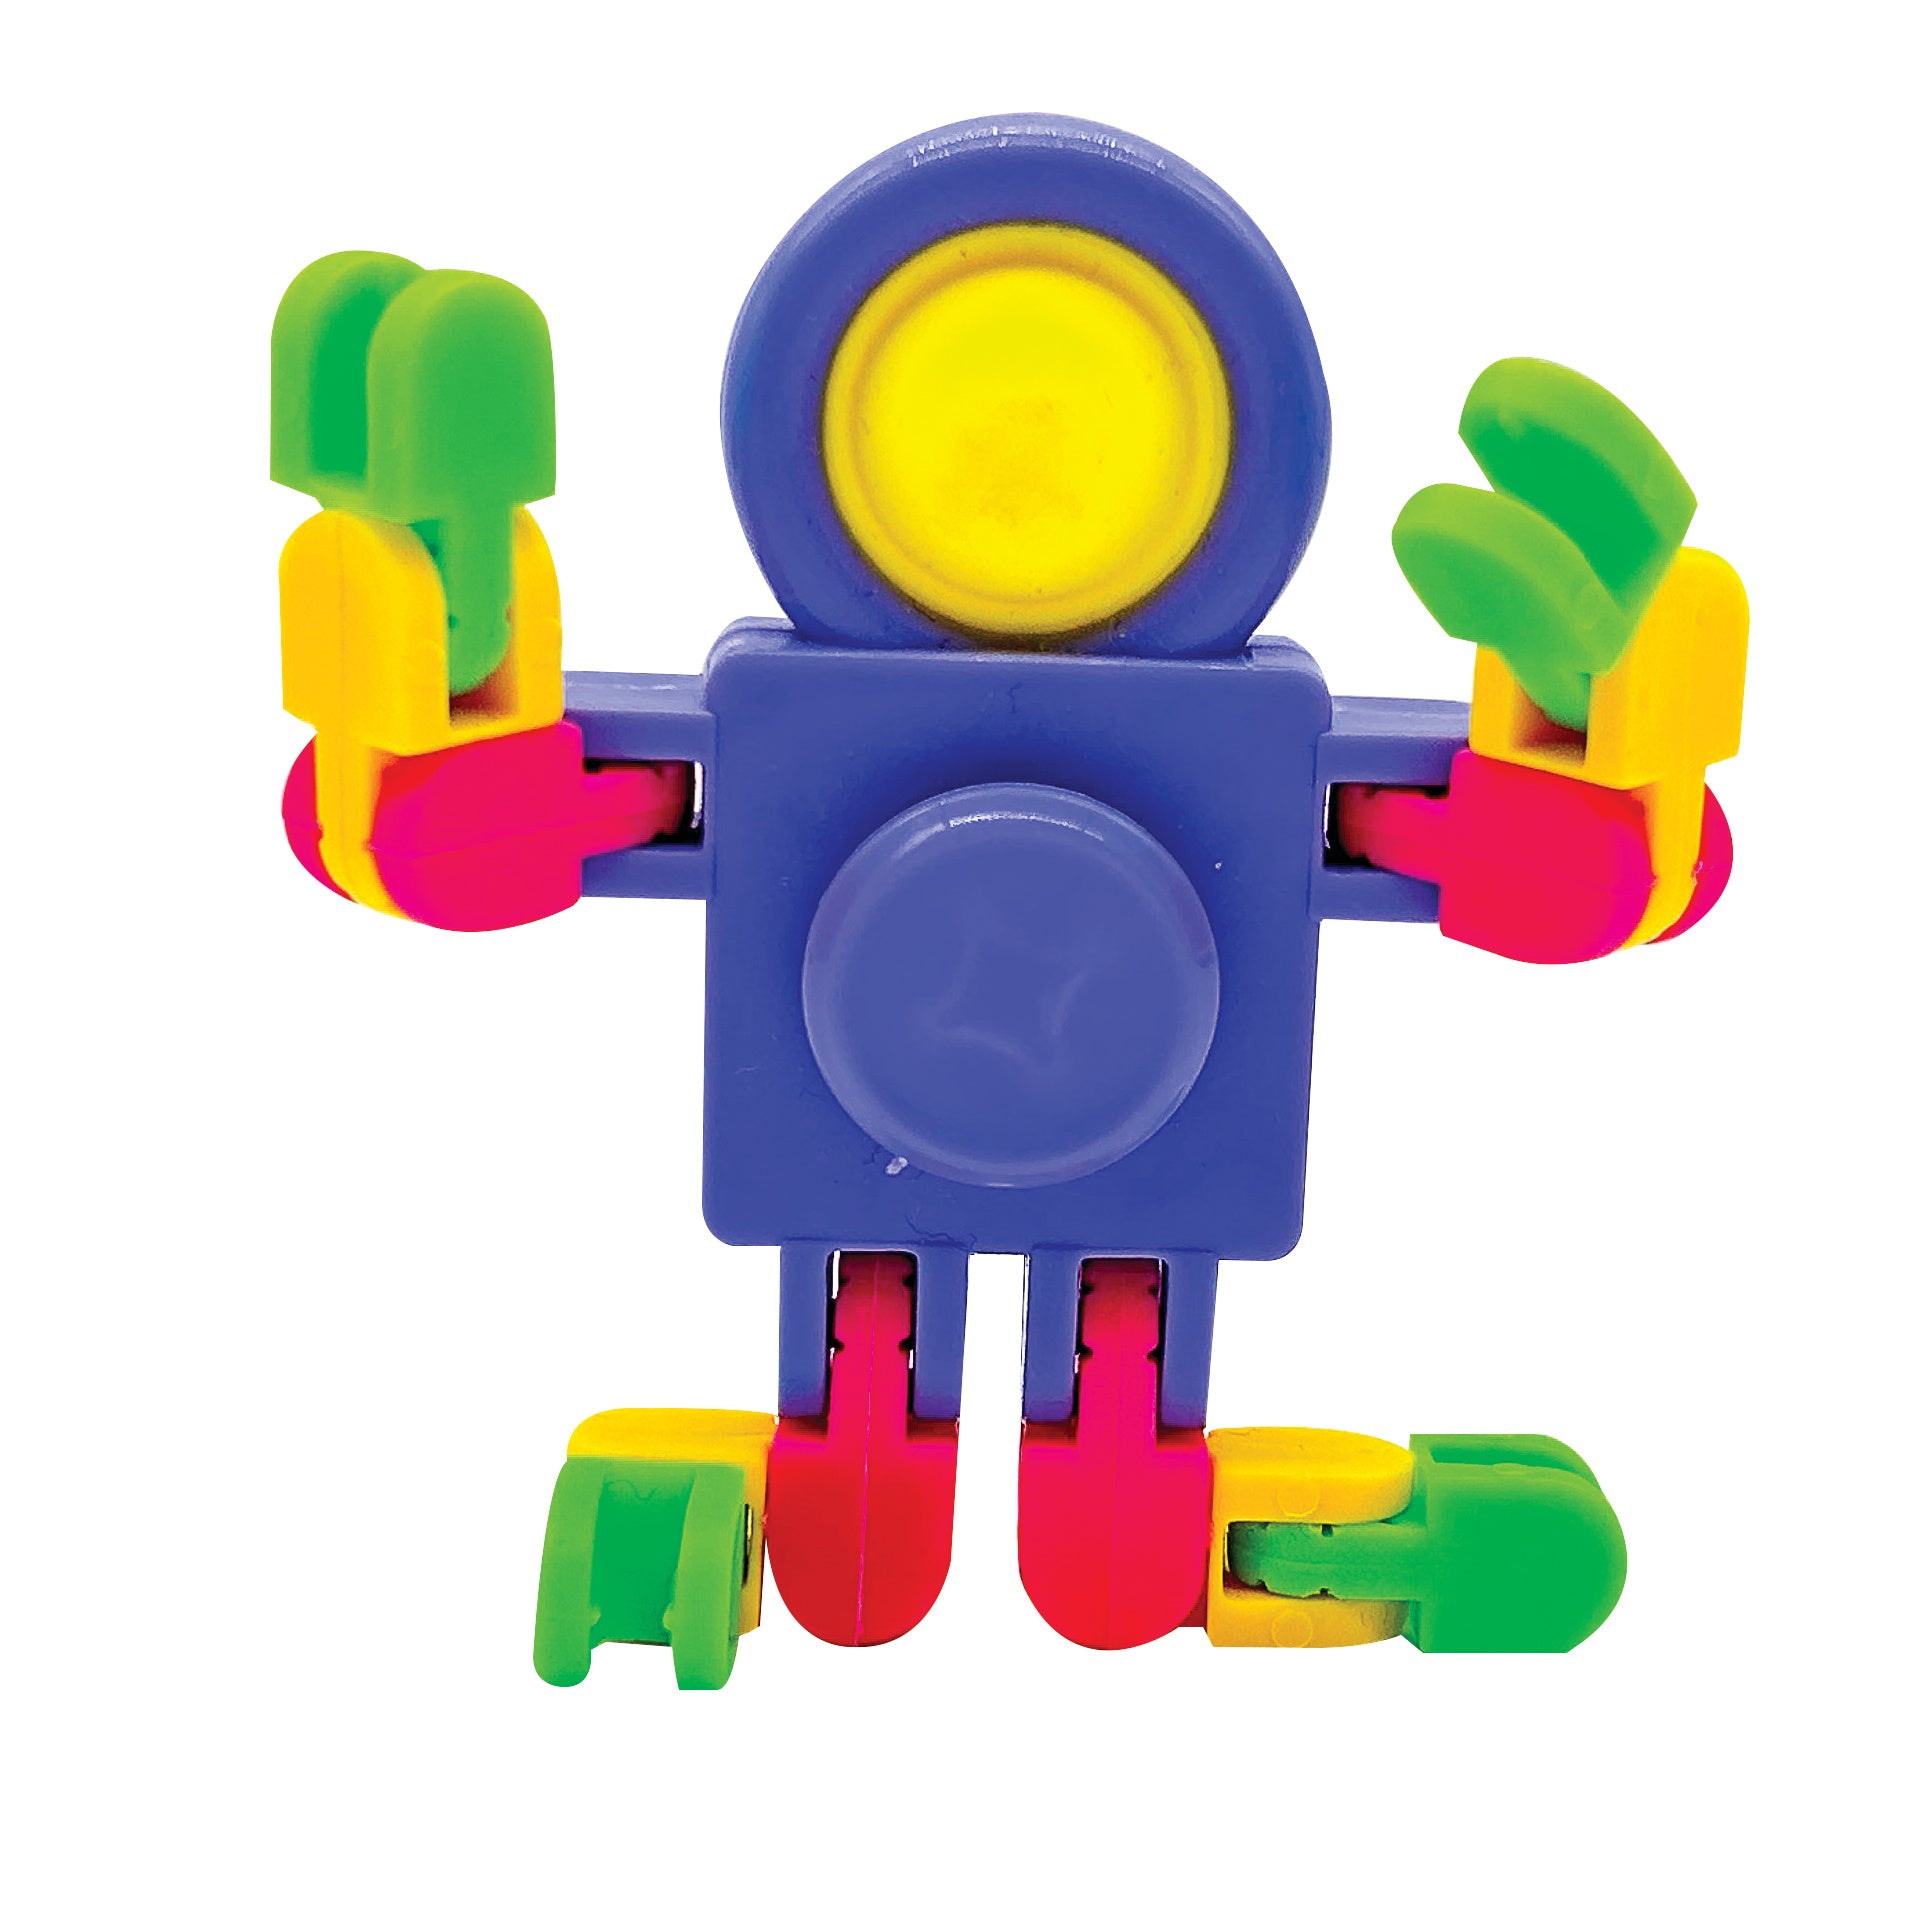 Pop ‘n’ Spin Whacky Guy Toys